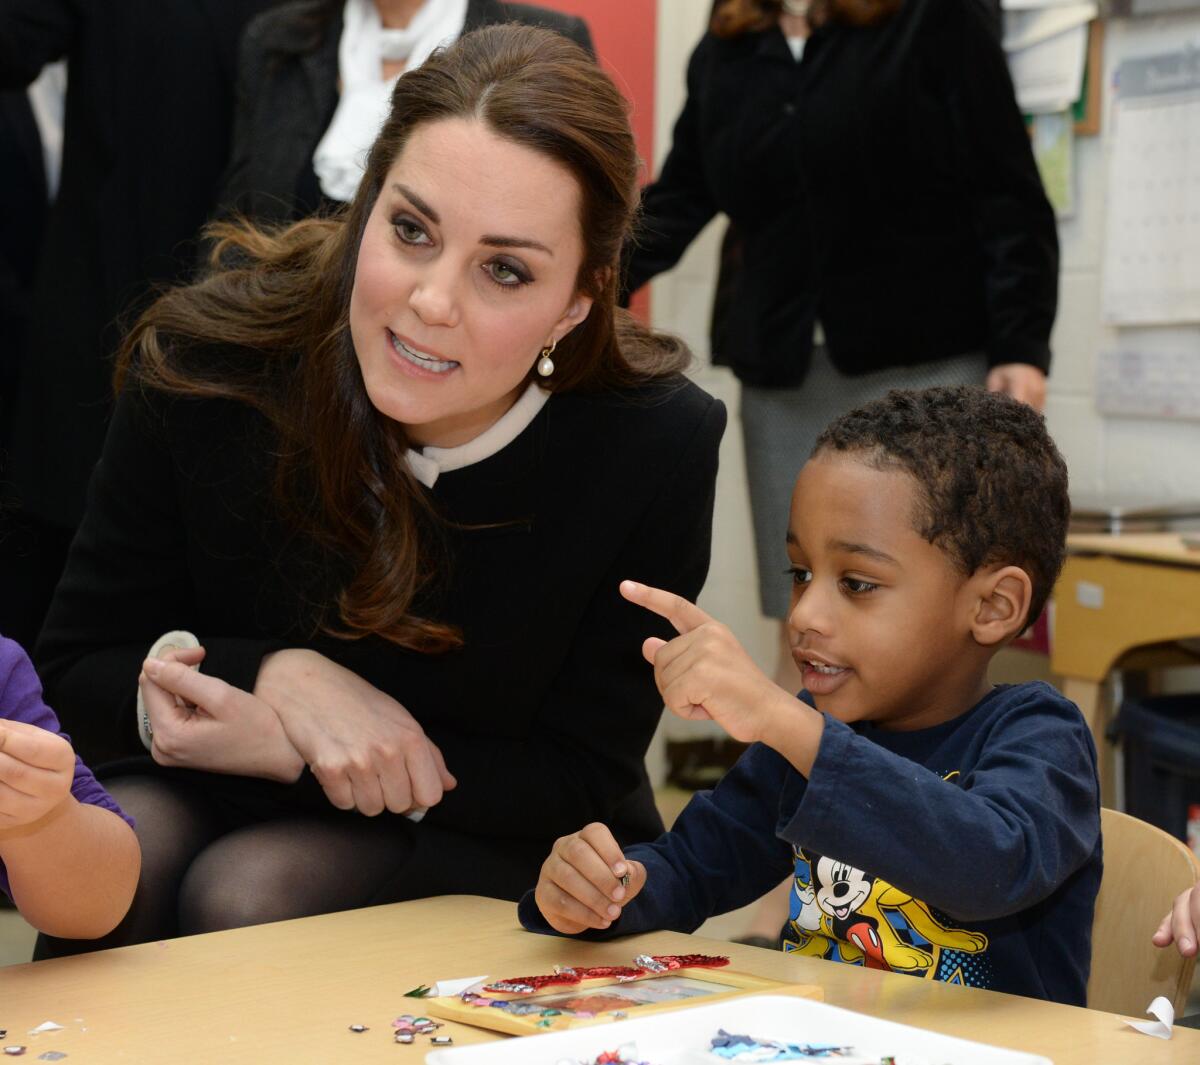 Catherine, Duchess of Cambridge, visits the Northside Center for Child Development on Monday in New York City.